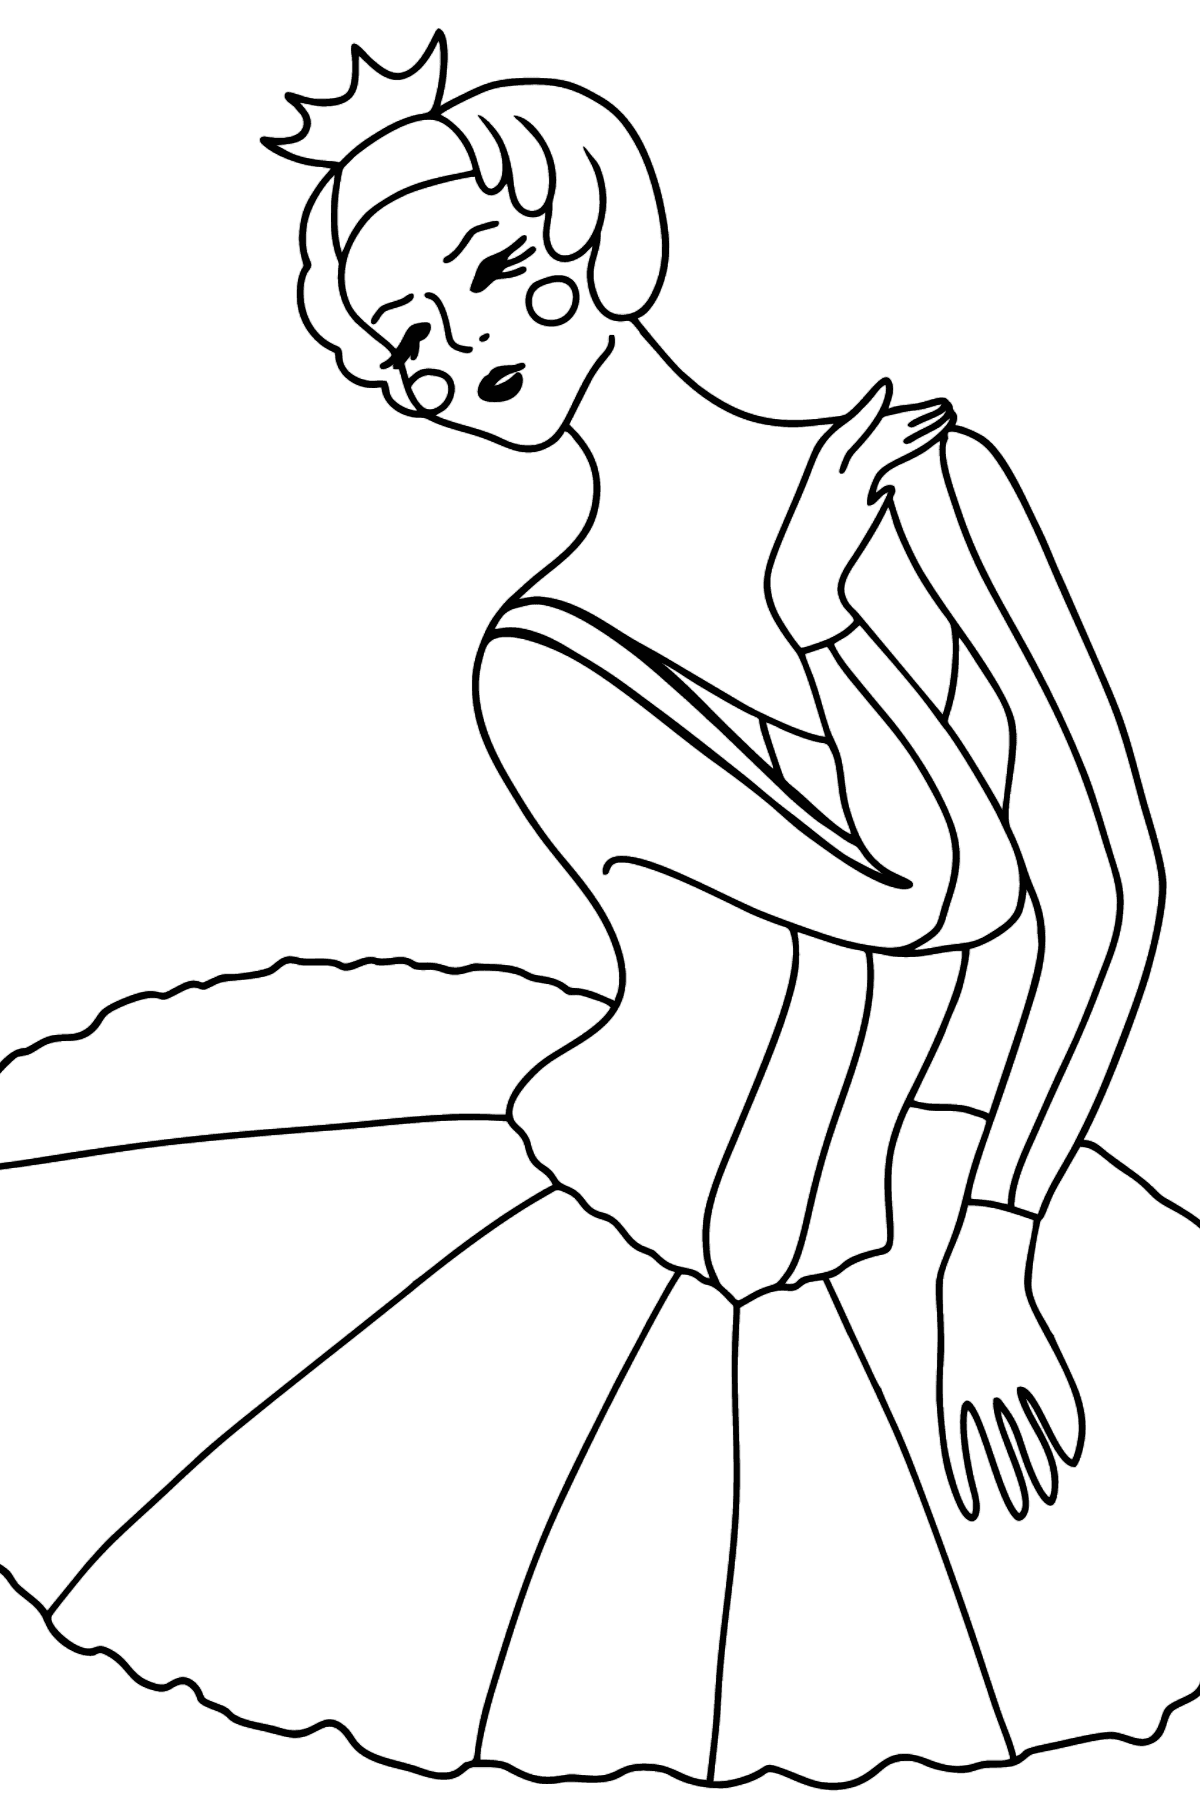 Ballerina in Tutu Skirt coloring page - Coloring Pages for Kids